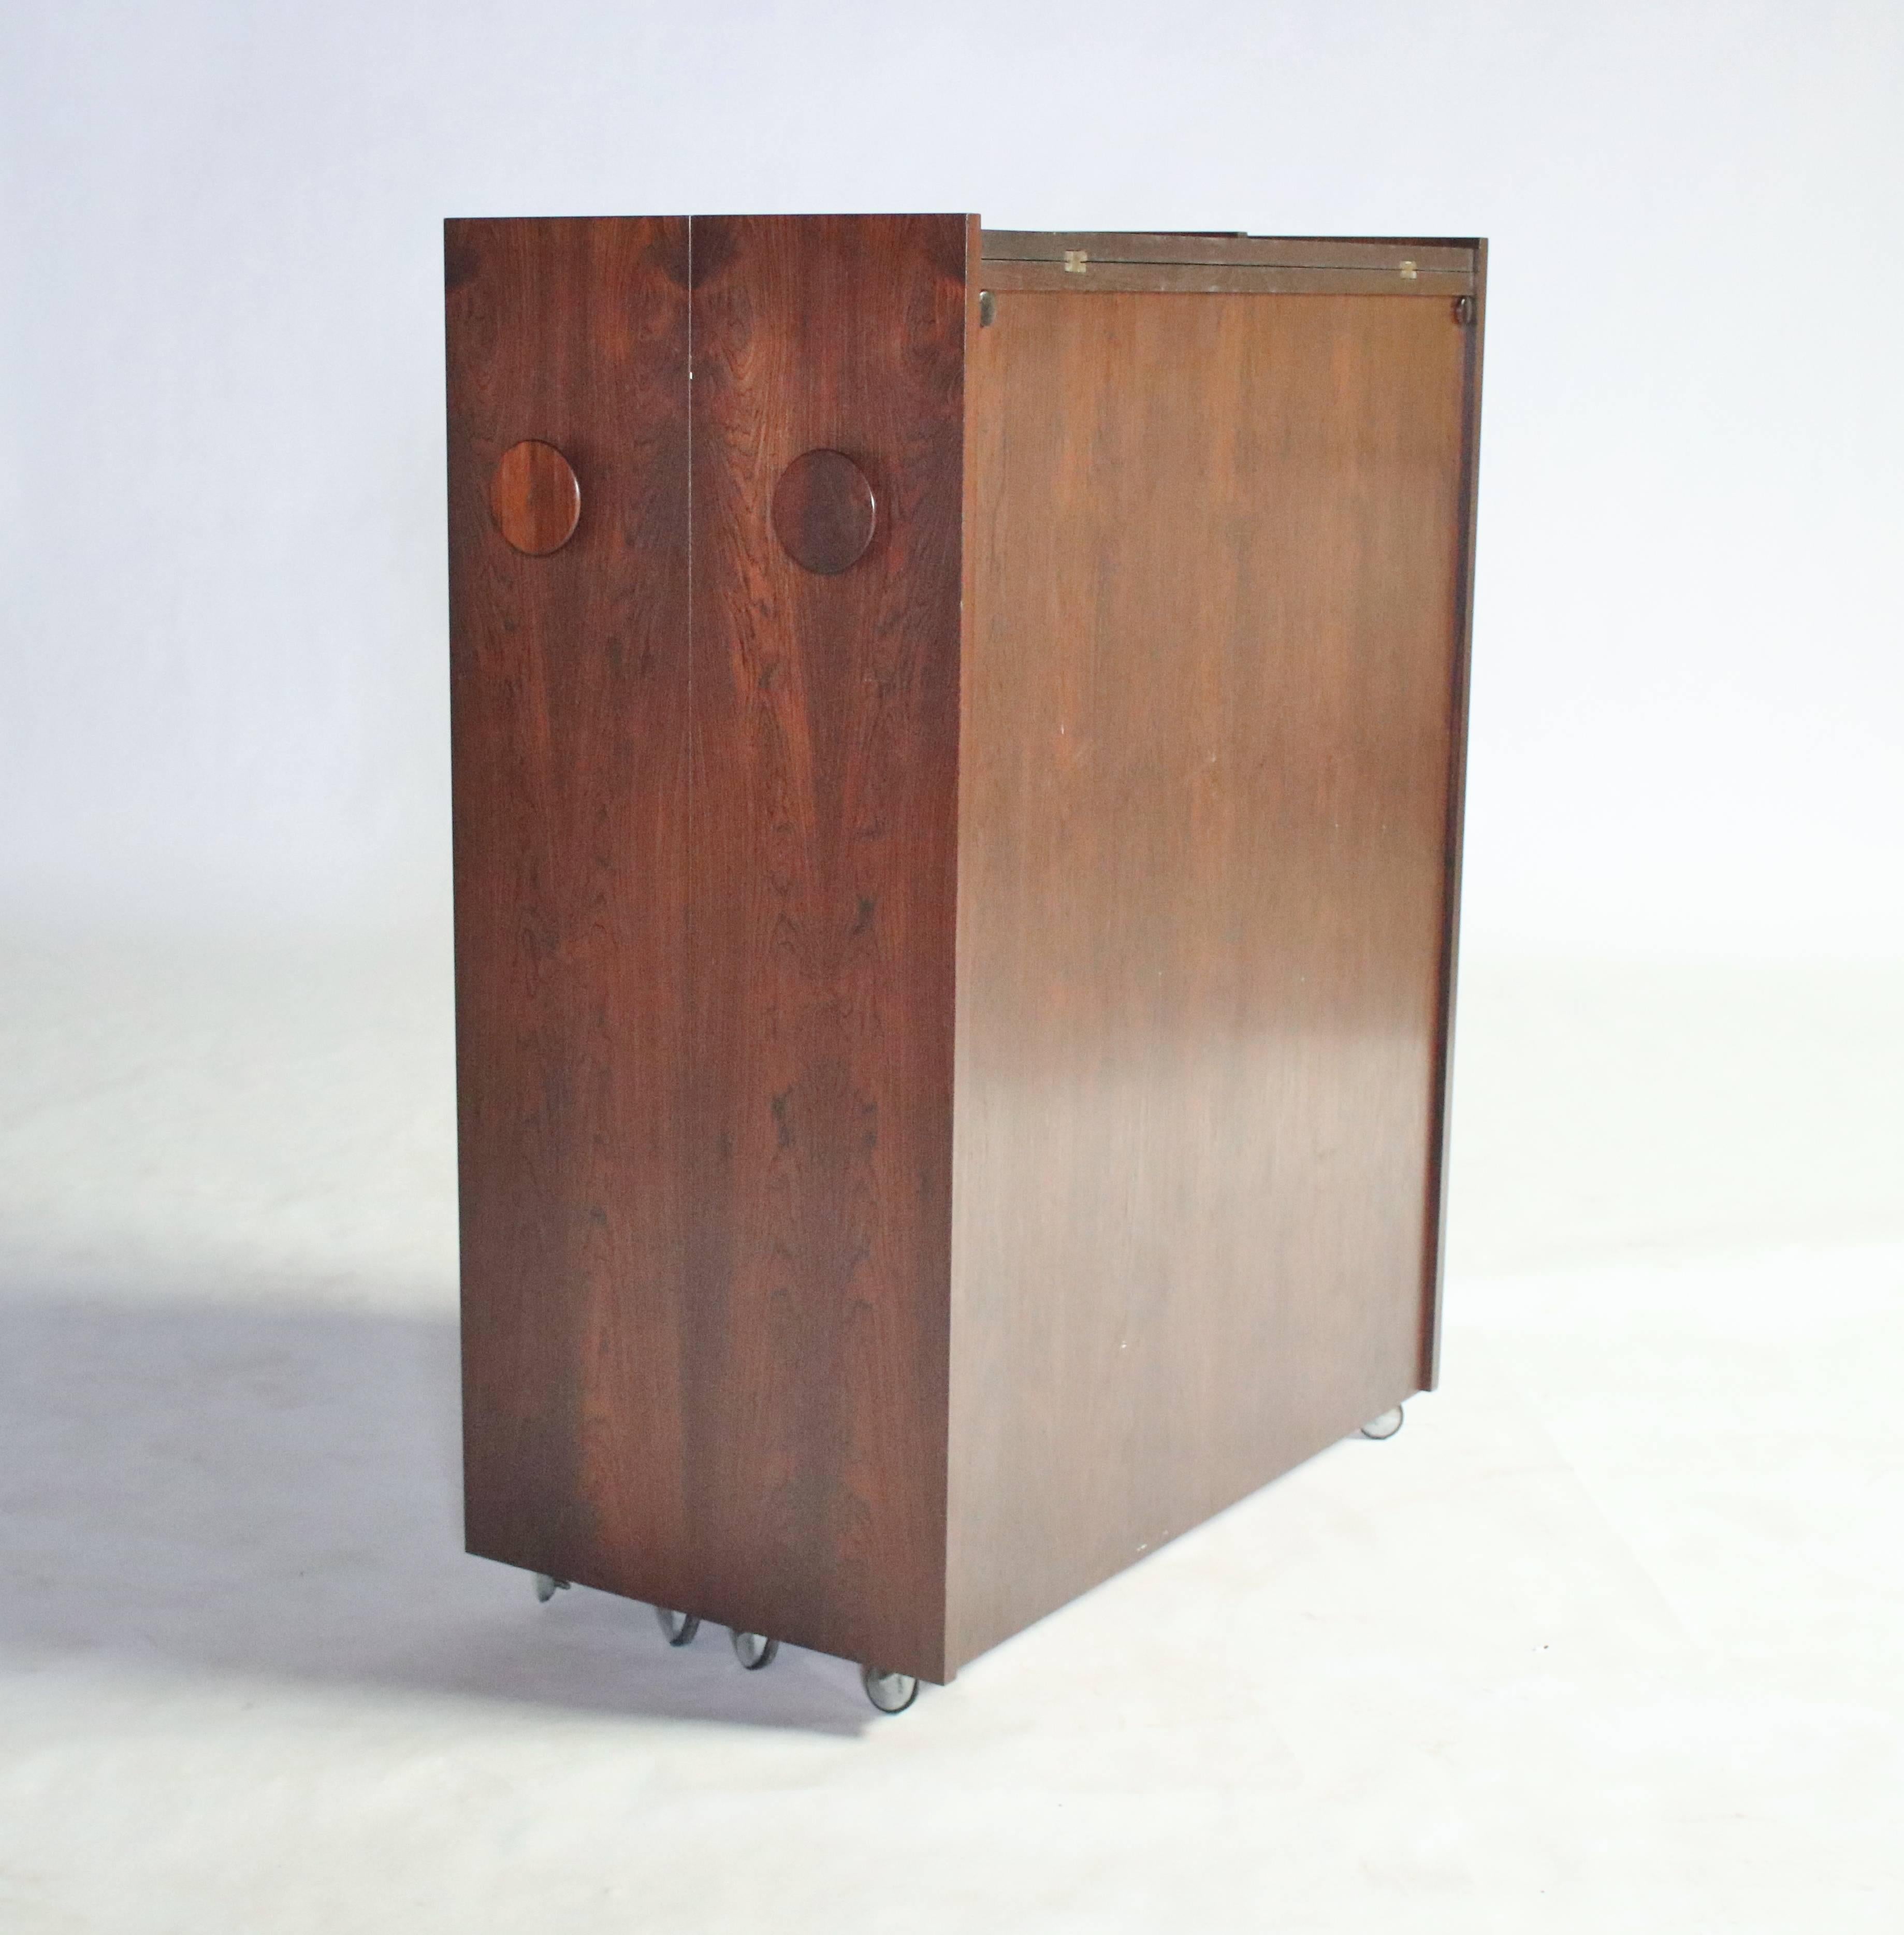 Folding Danish modern dry bar designed by Eric Buch in a beautiful rosewood case. Opens to a rosewood interior with three adjustable shelves and hinged over-hang shelves lined in black laminate for beverages. Another interior shelf open to reveal an